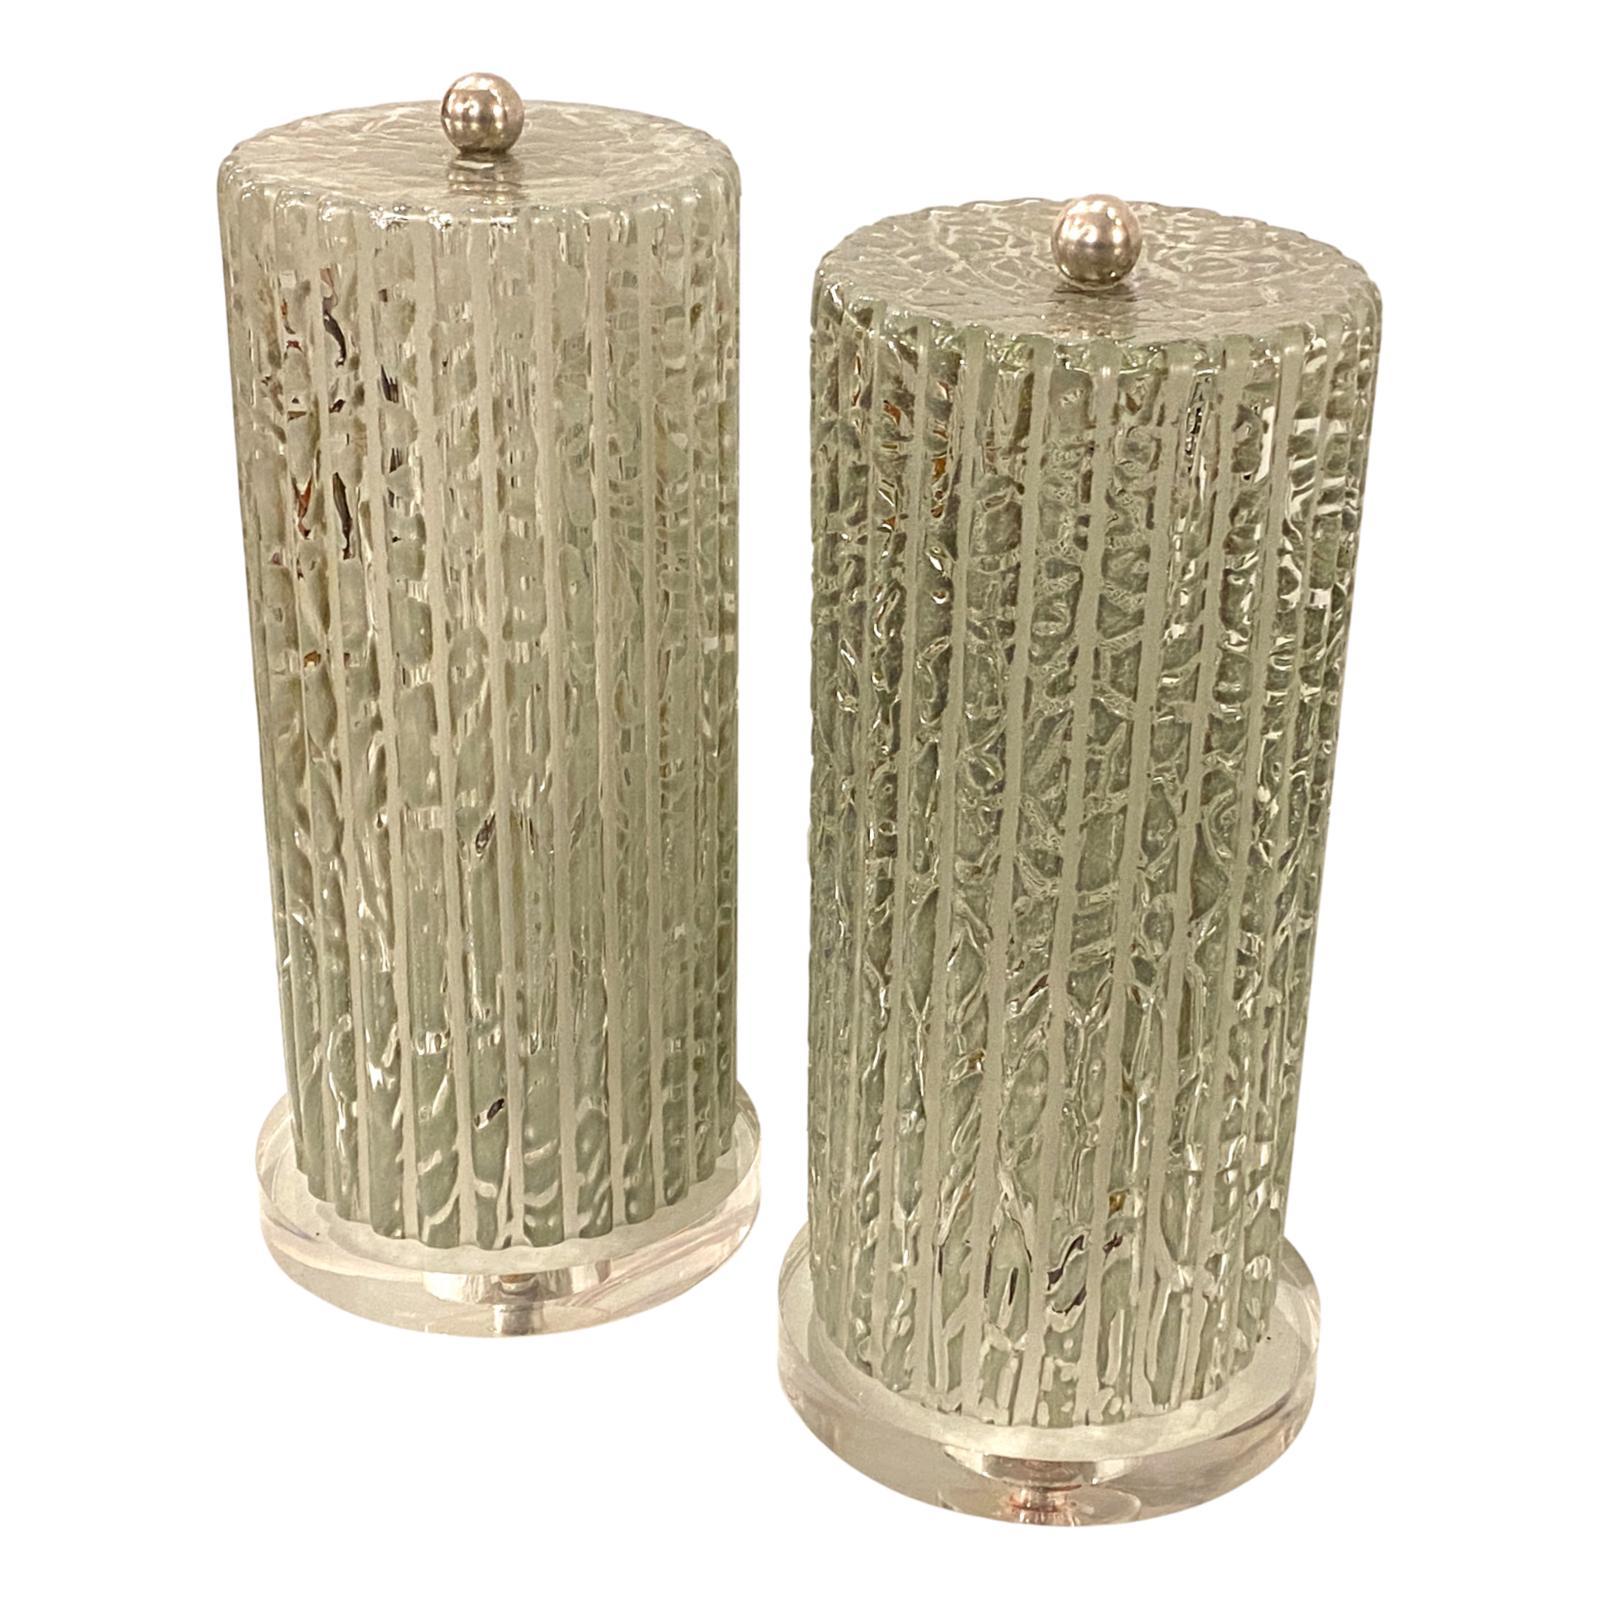 Pair of circa 1960s Italian enclosed hurricane molded glass lamps with interior light, Lucite bases and nickel-plated finial.

Measurements:
Height 15.5